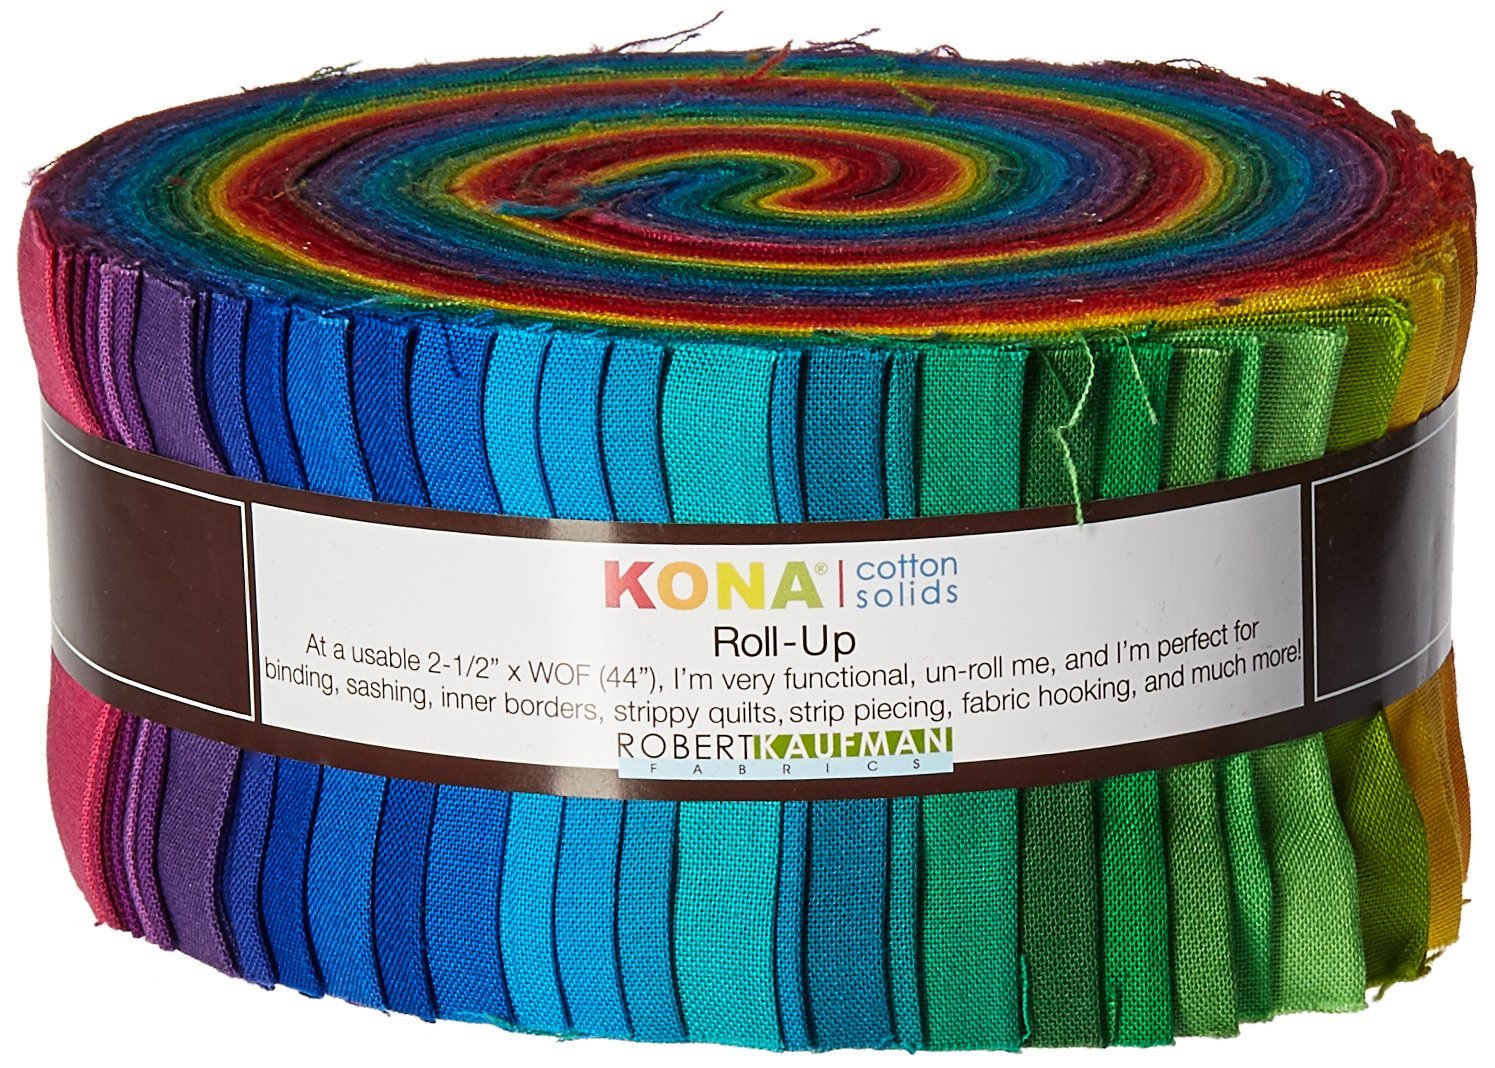 Kona Cotton Solids 2.5-Inch Roll-Up - New Classic Color Palette (41 strips)